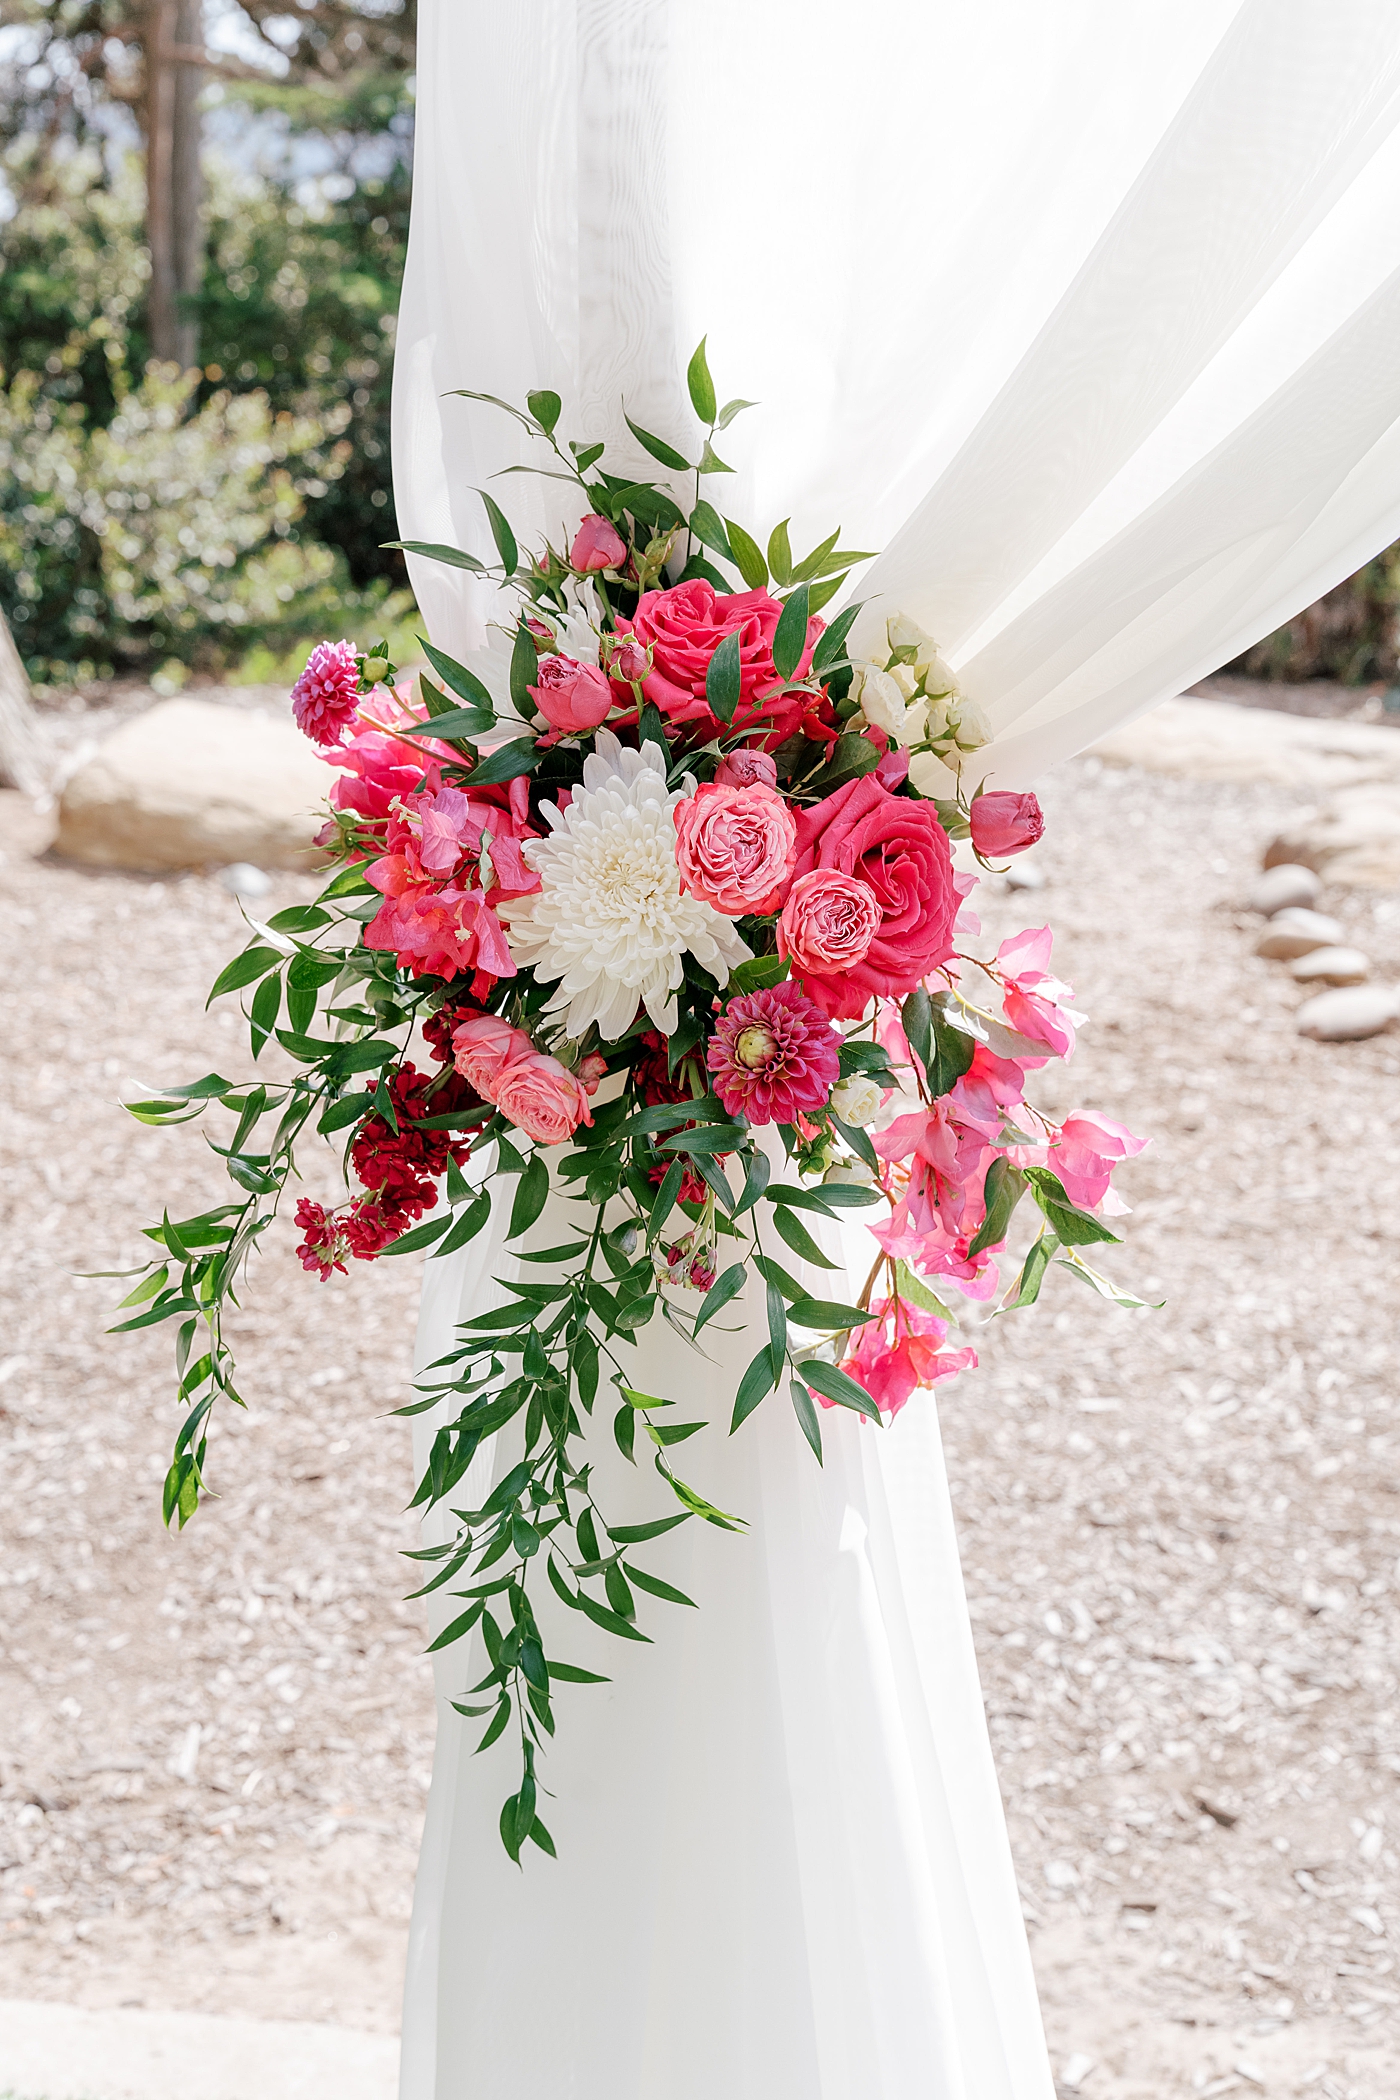 Vignette of a tropical wedding ceremony site's arch covered in white fabric and bright pink flowers| Image by San Diego Wedding Photographer Hope Helmuth